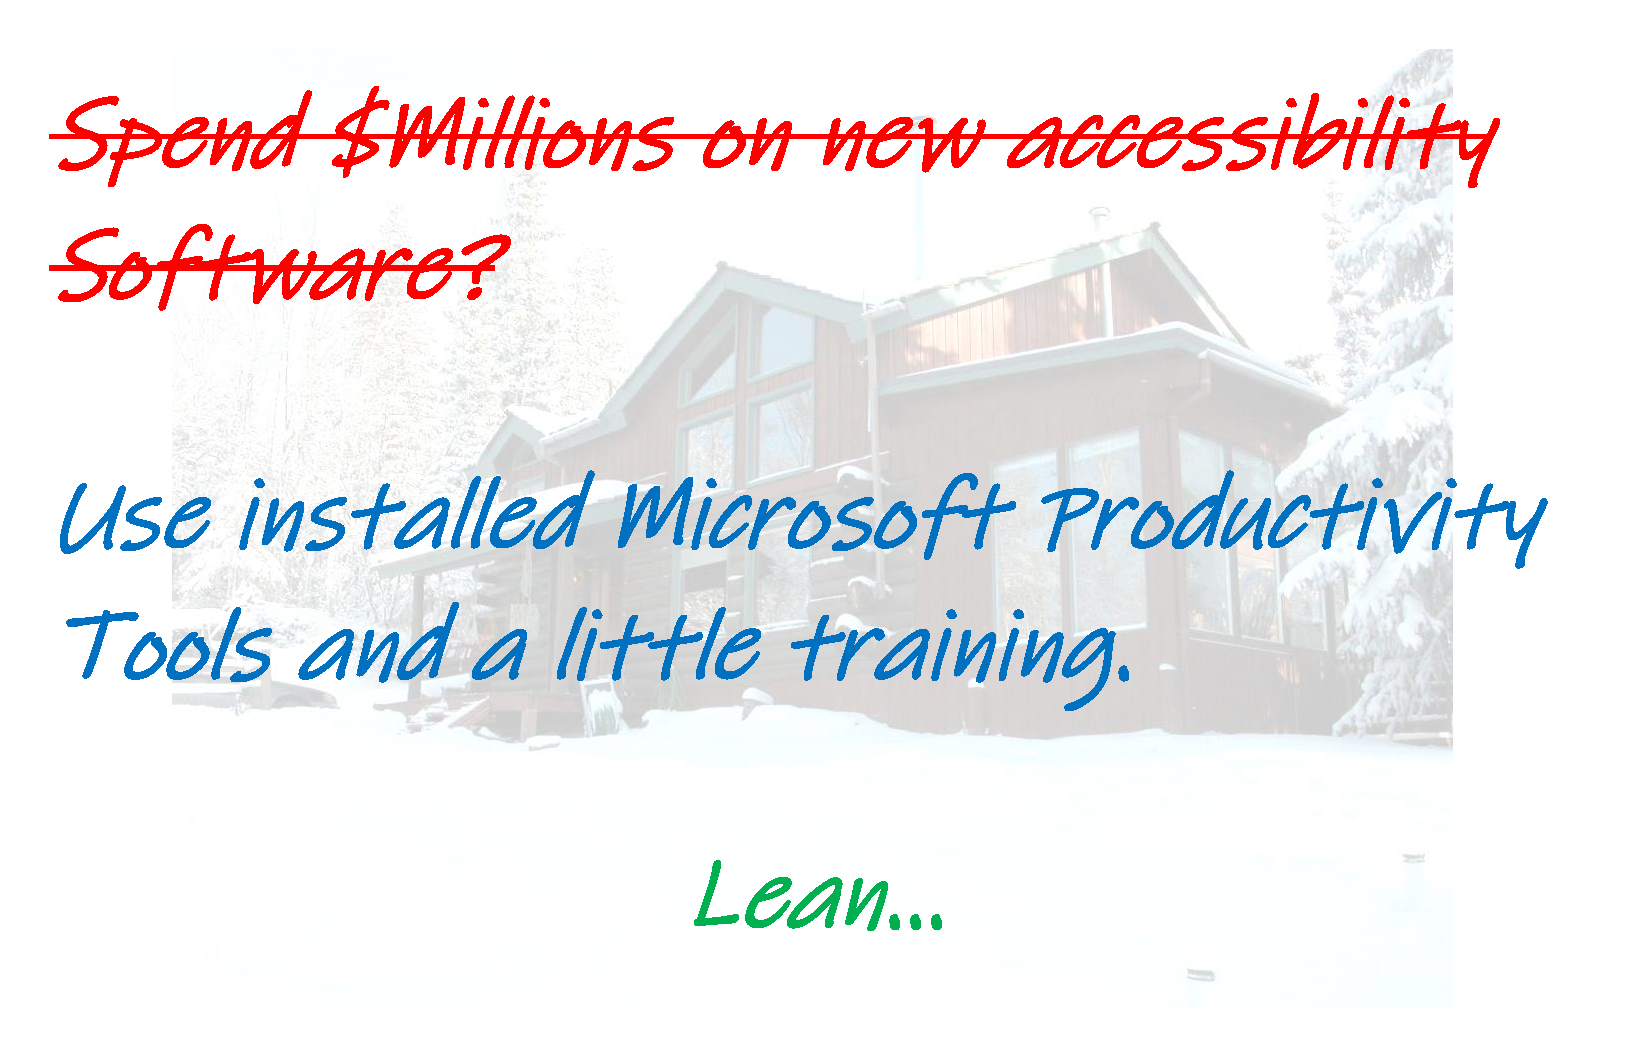 Use installed Microsoft Productivity Tools and a little training.
Lean…